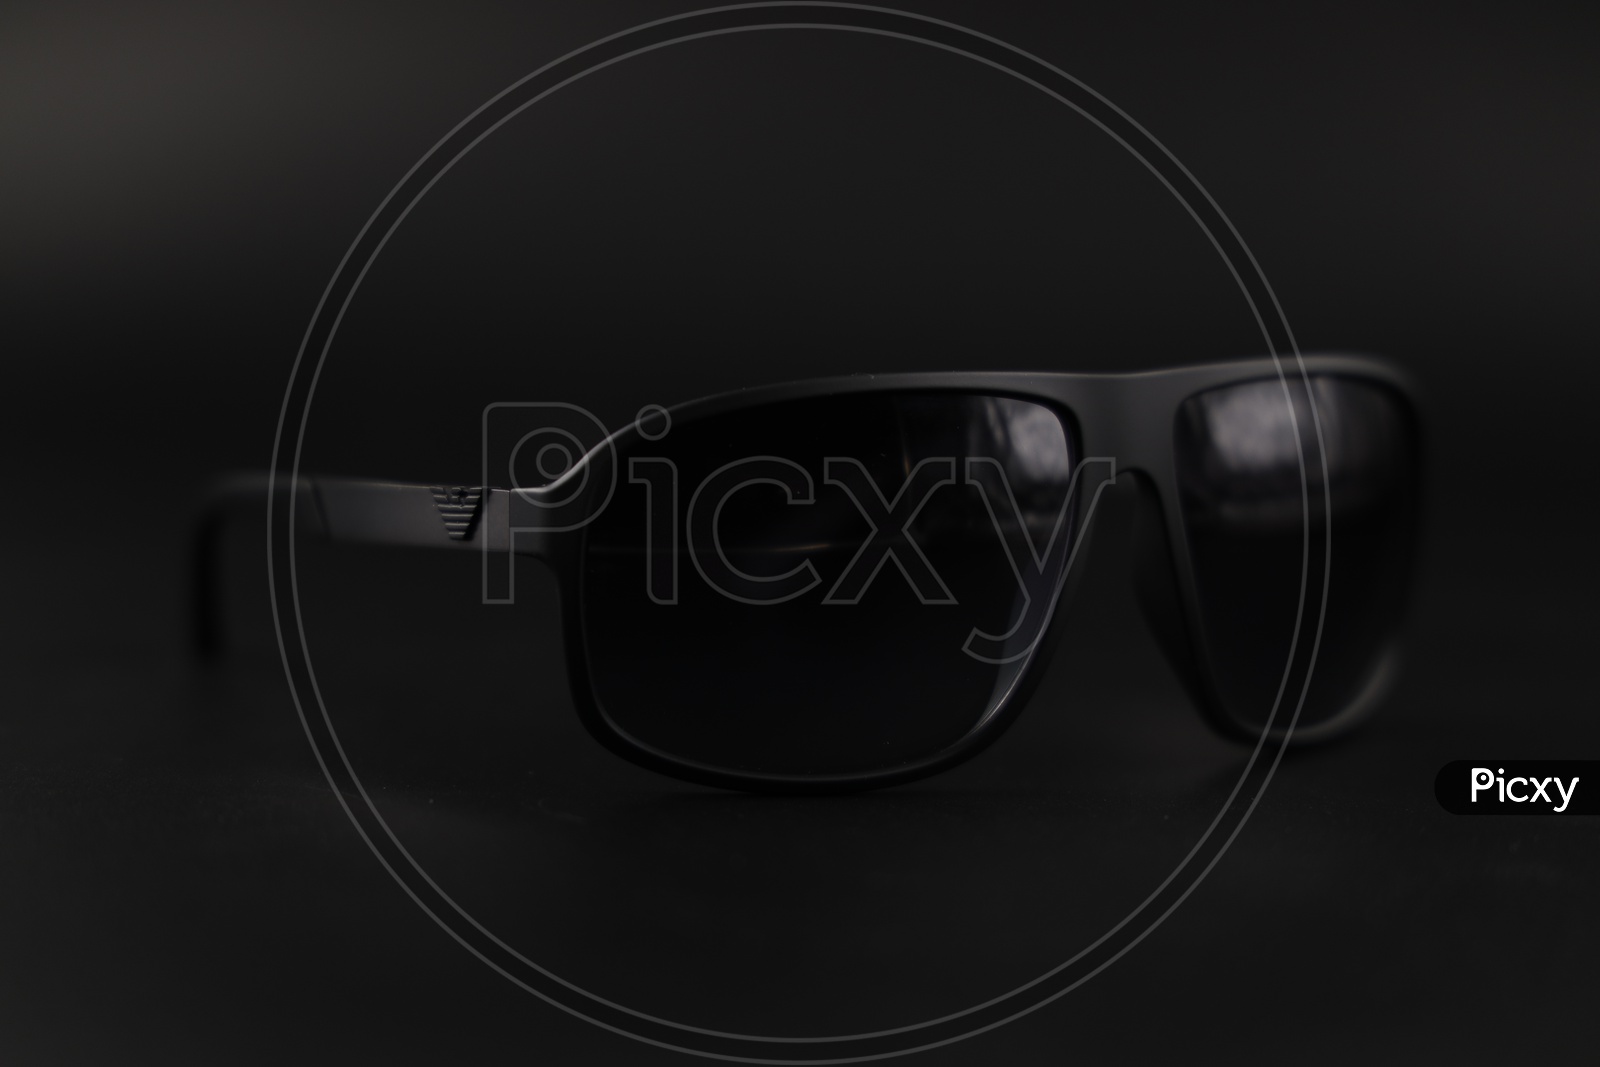 Emporio  Armani  Sunglasses  or Goggles  On an Isolated Background